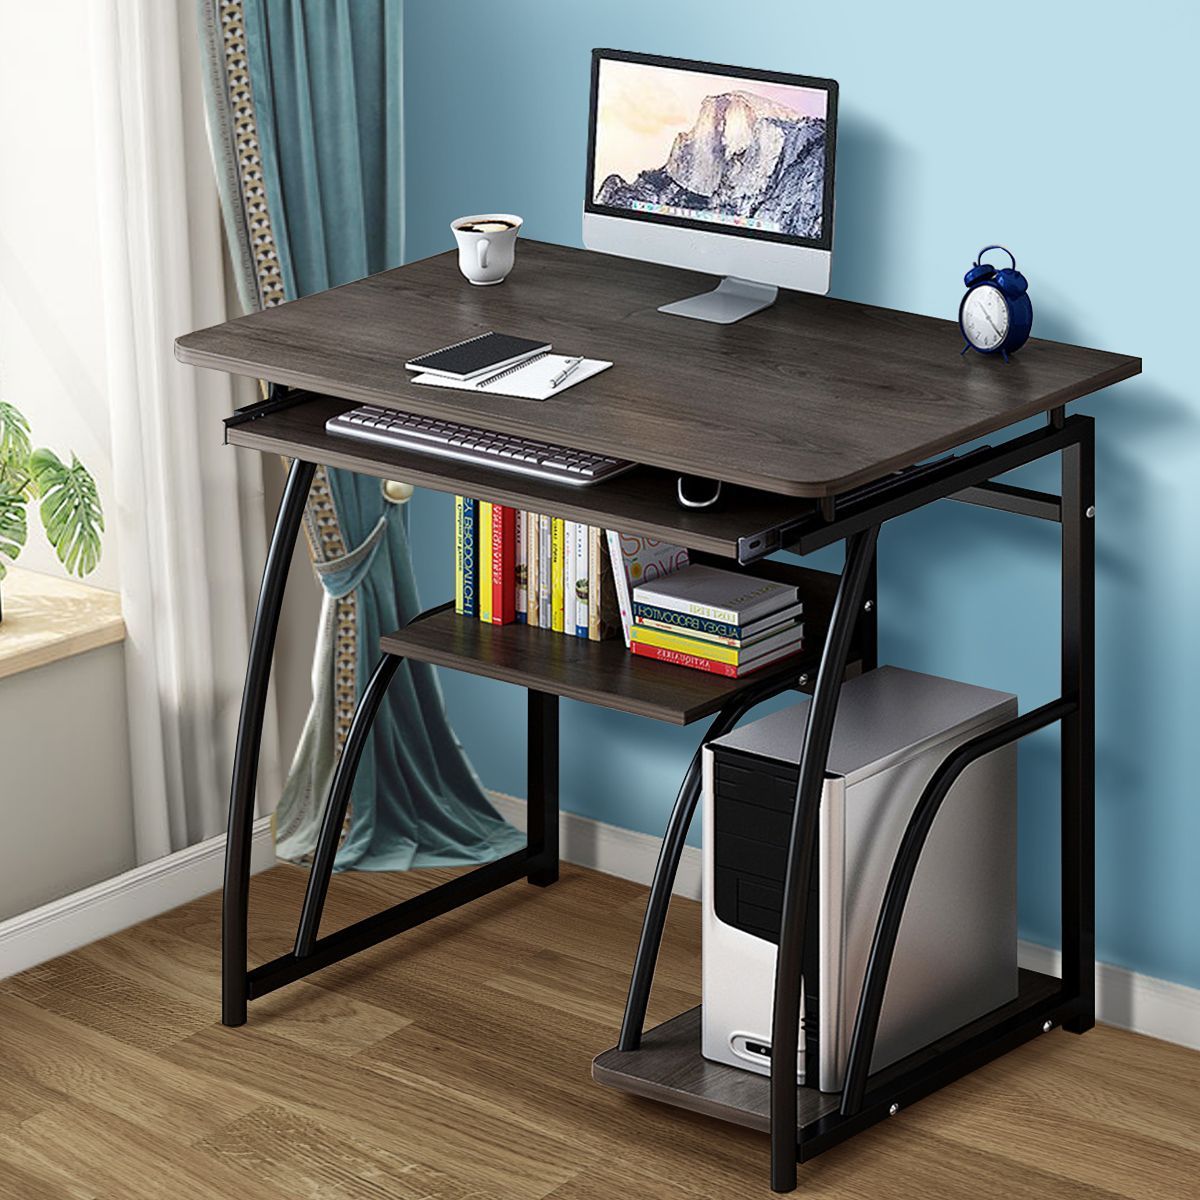 Wooden-Computer-Desk-Study-Laptop-PC-Workstation-Writing-Tray-Table-Home-Office-Desk-1740291